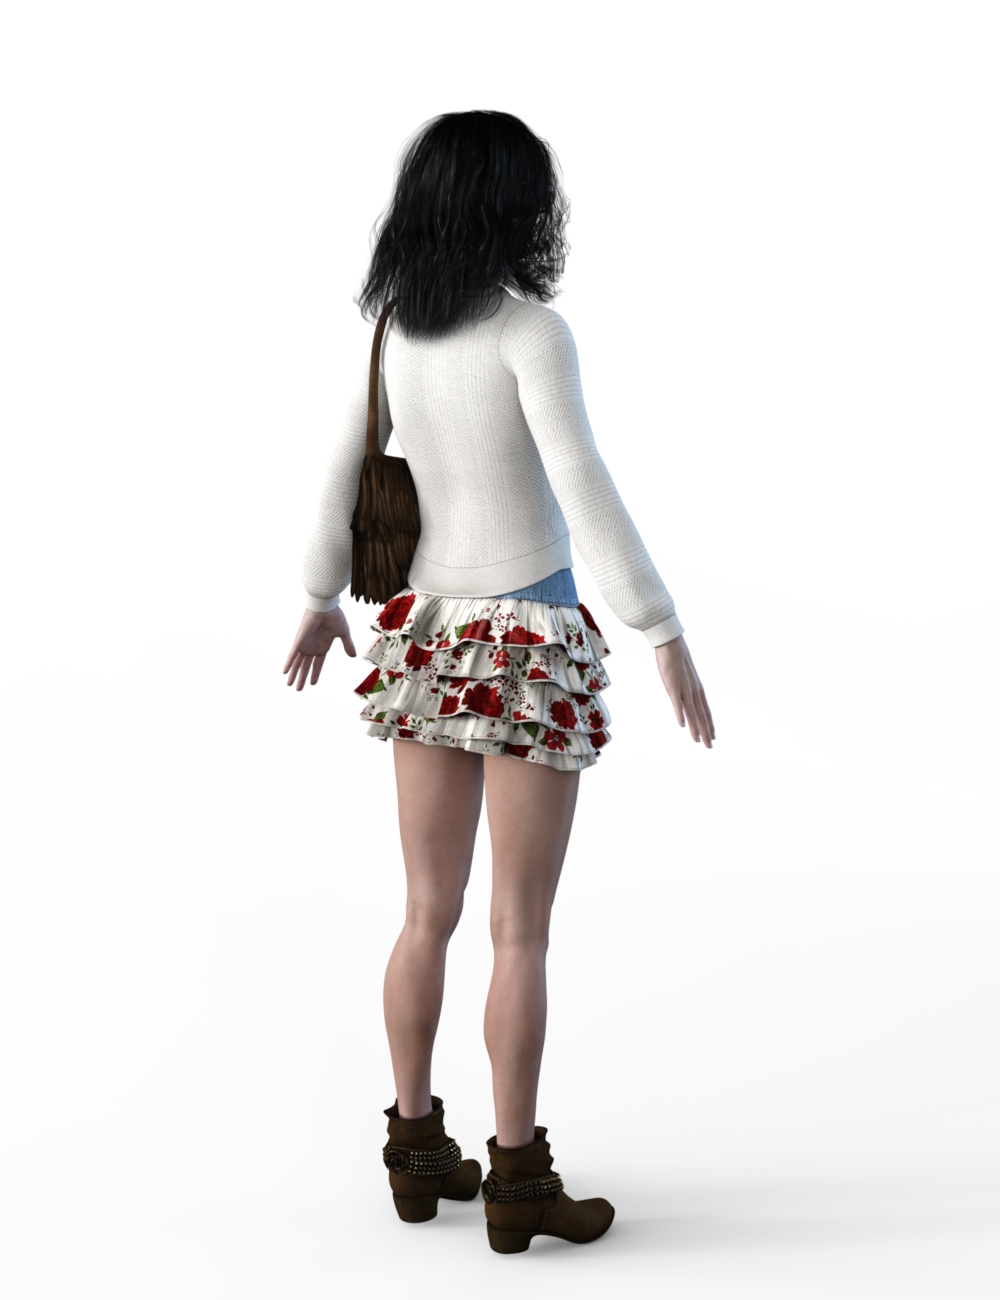 FBX- Mei Lin Sunny Summer Outfit by: Paleo, 3D Models by Daz 3D